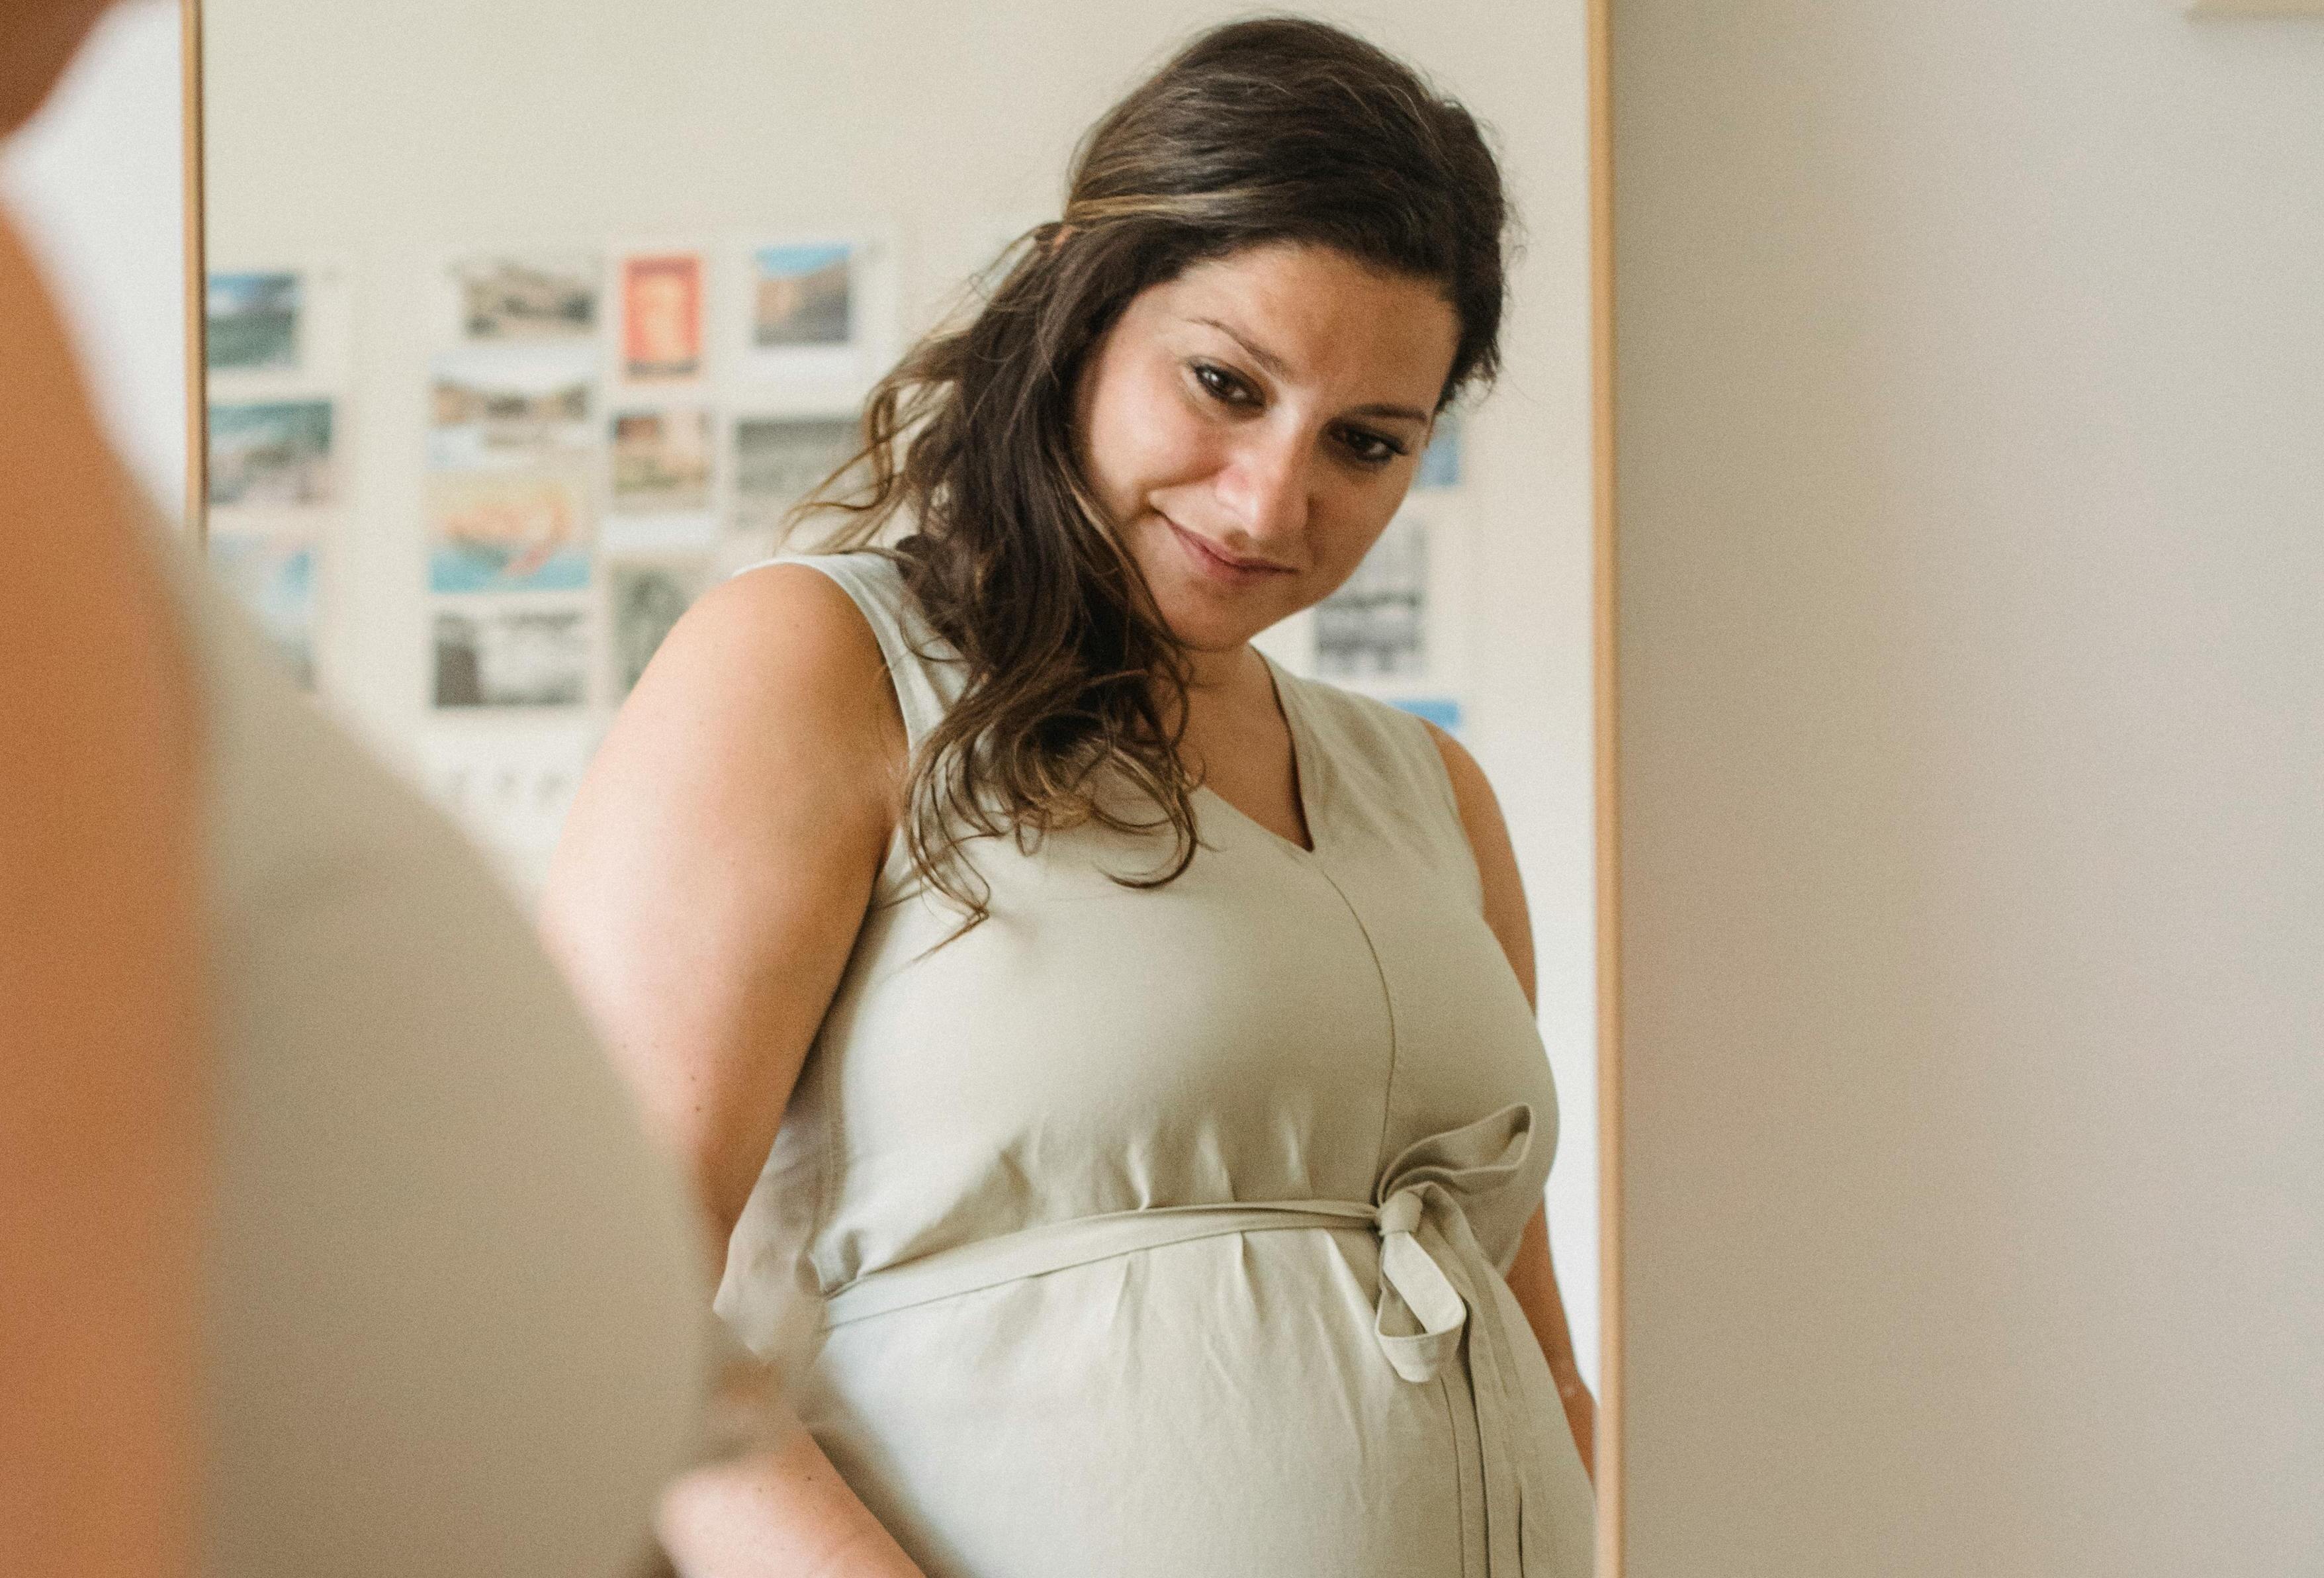 Pregnant woman with a serious expression | Source: Pexels